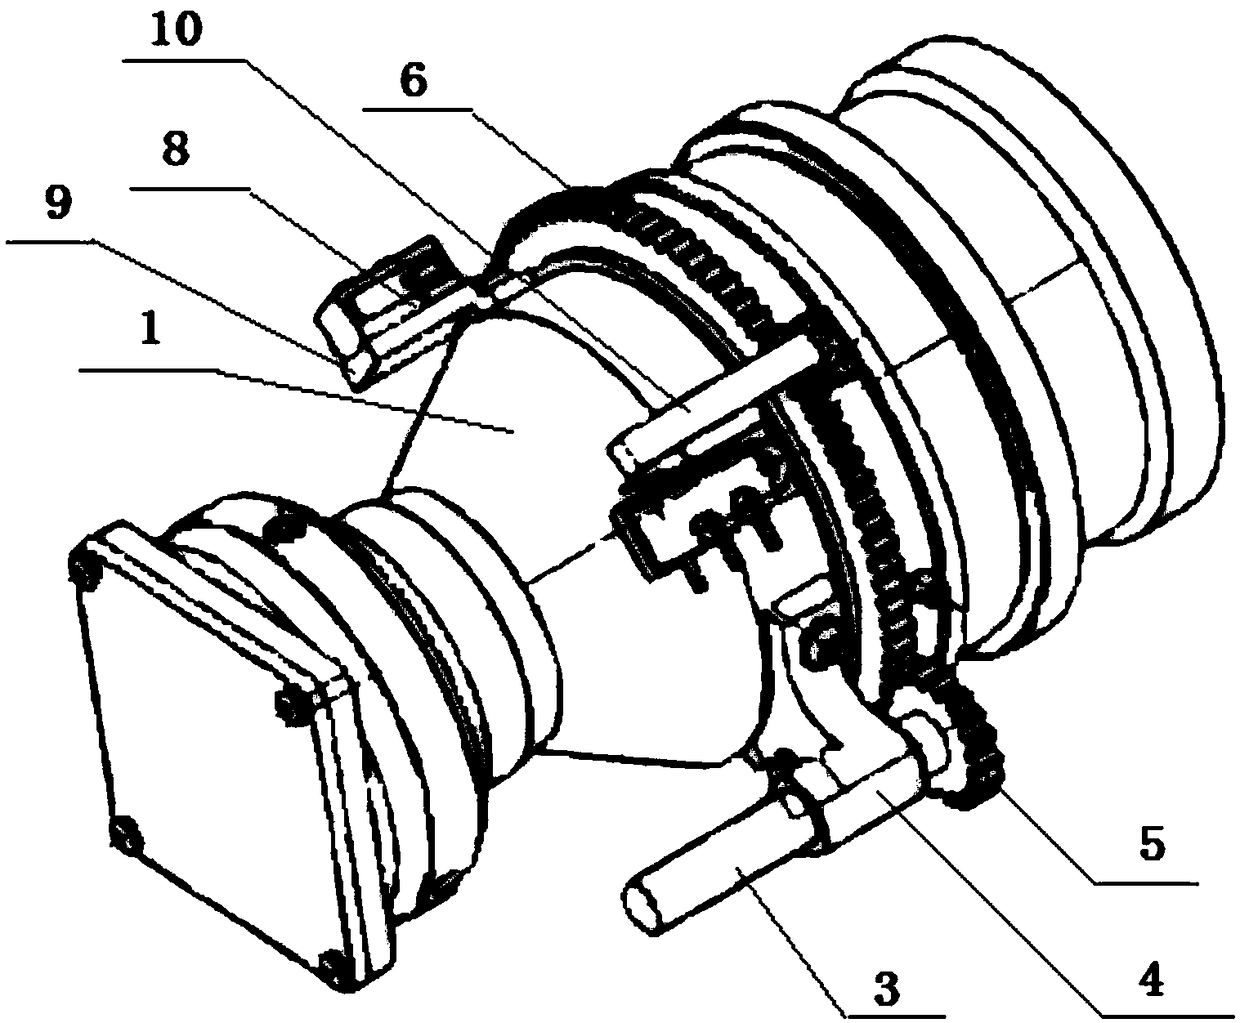 A structure for automatically adjusting the aperture diameter of a diaphragm